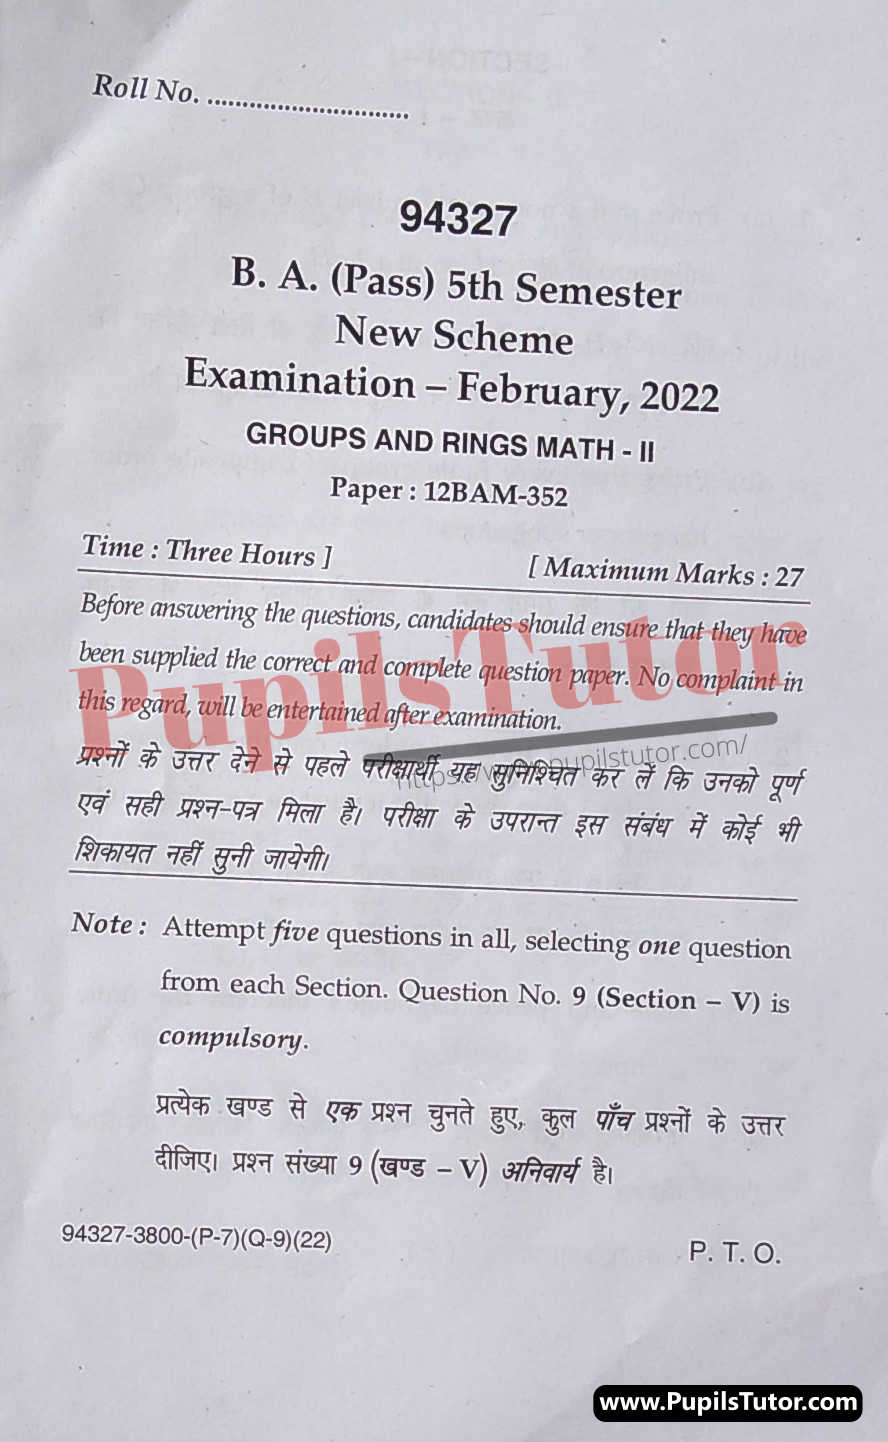 MDU (Maharshi Dayanand University, Rohtak Haryana) BA Pass Course 5th Semester Previous Year Groups And Rings Math Question Paper For February, 2022 Exam (Question Paper Page 1) - pupilstutor.com